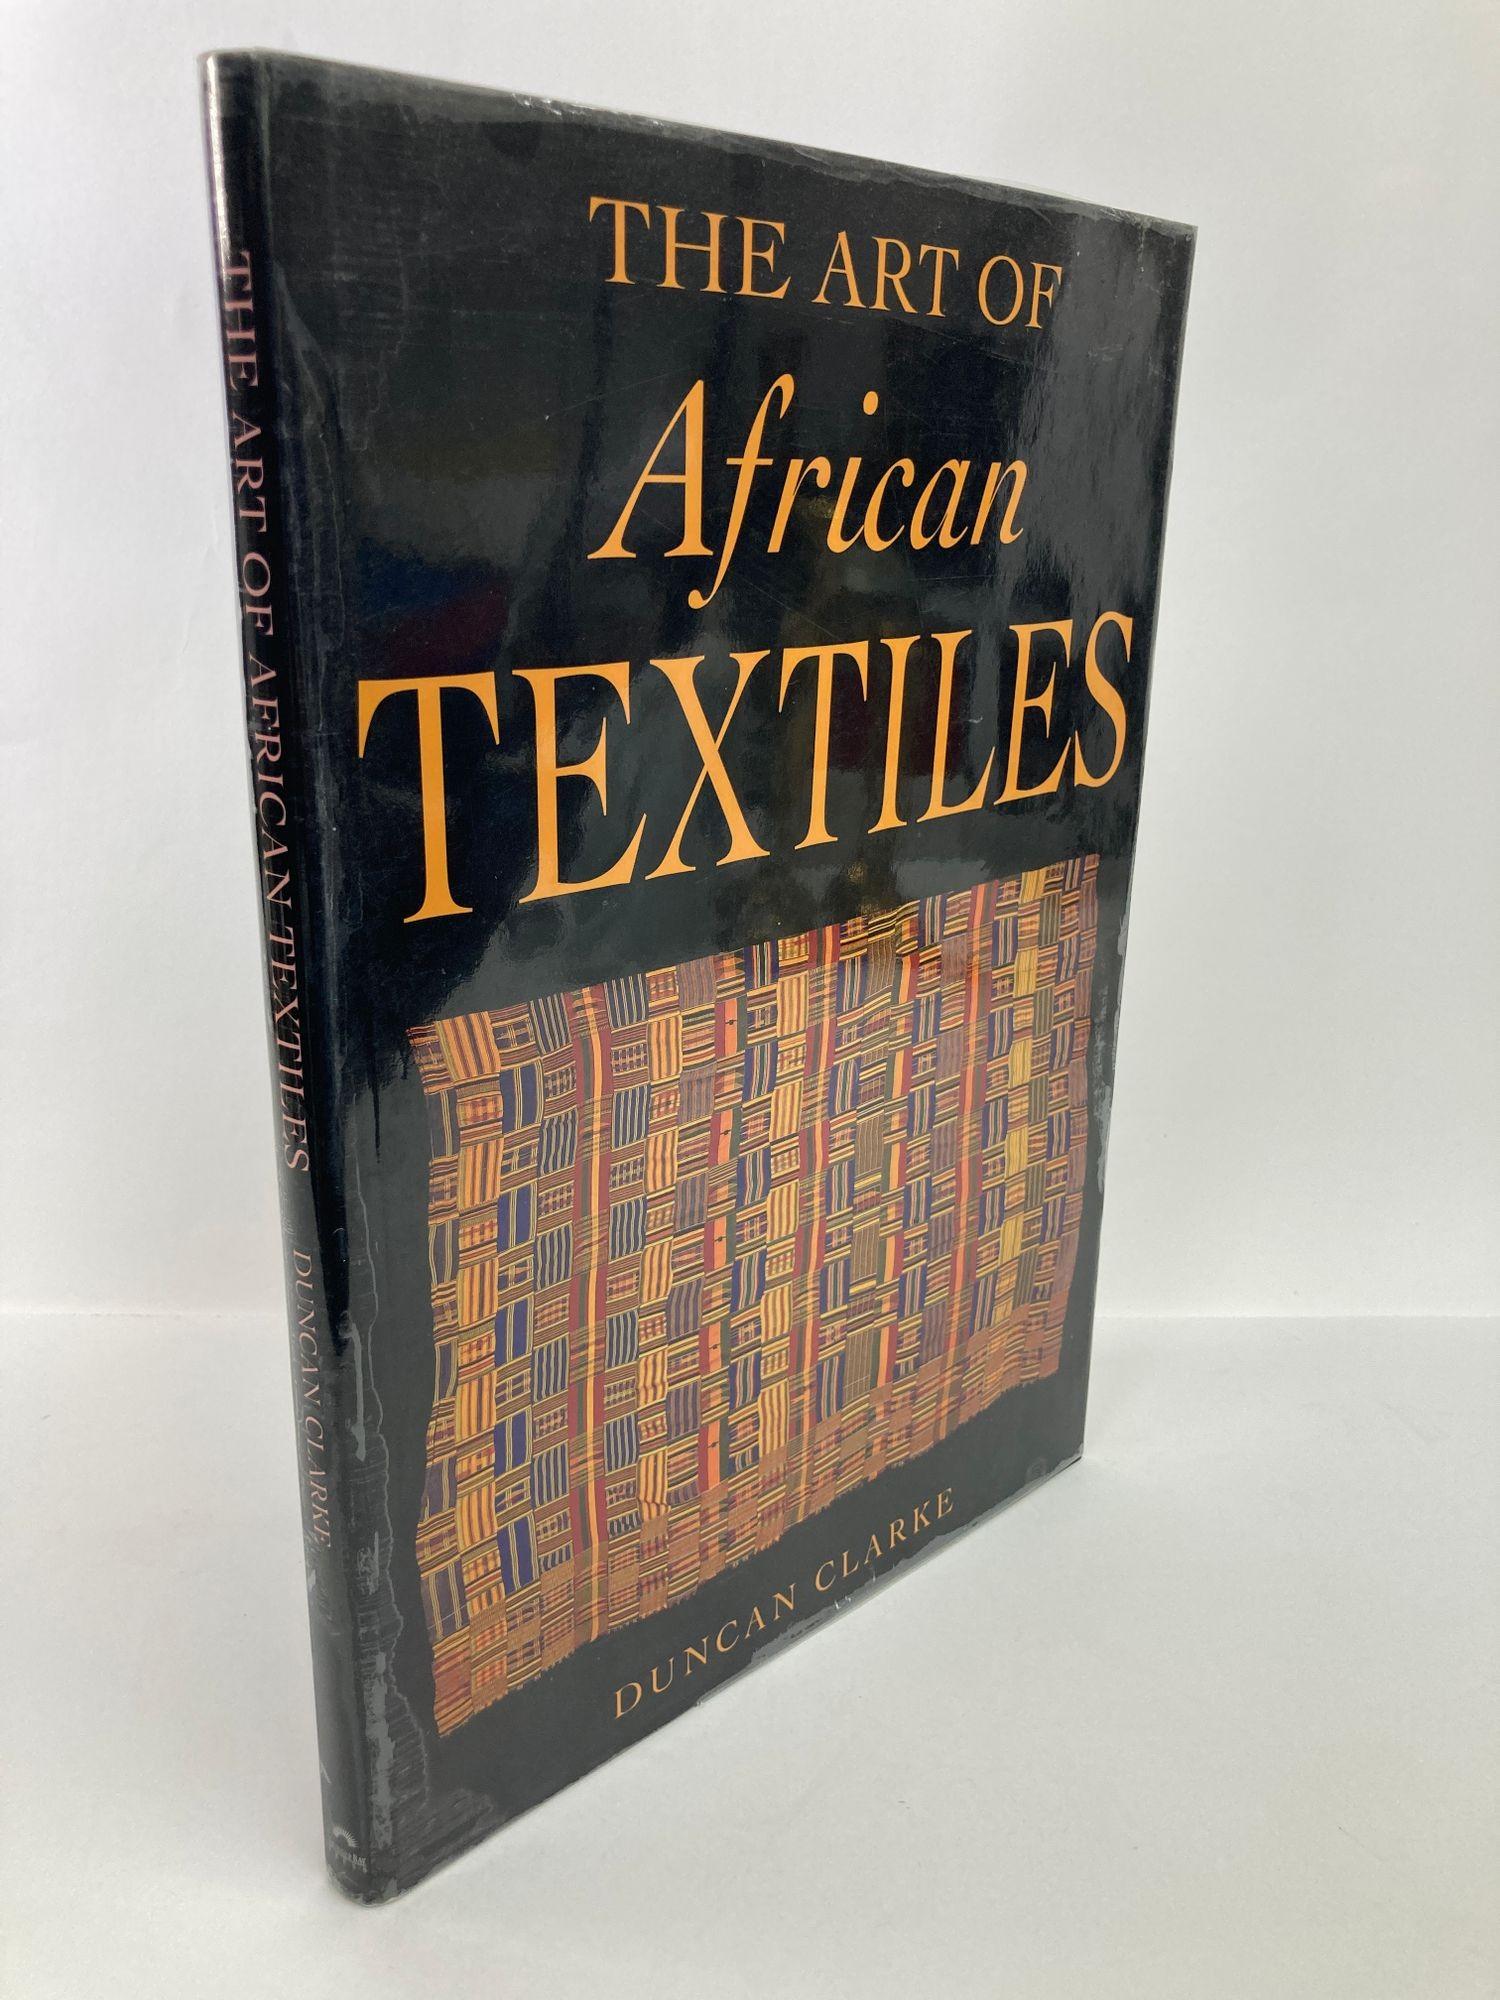 The Art Of African Textiles
Clarke, Duncan. Published by Thunder Bay., San Diego., 2002.
This book offers a fascinating journey through the history and culture of textiles in Africa drawn from the private collection of Karun Thakar, widely